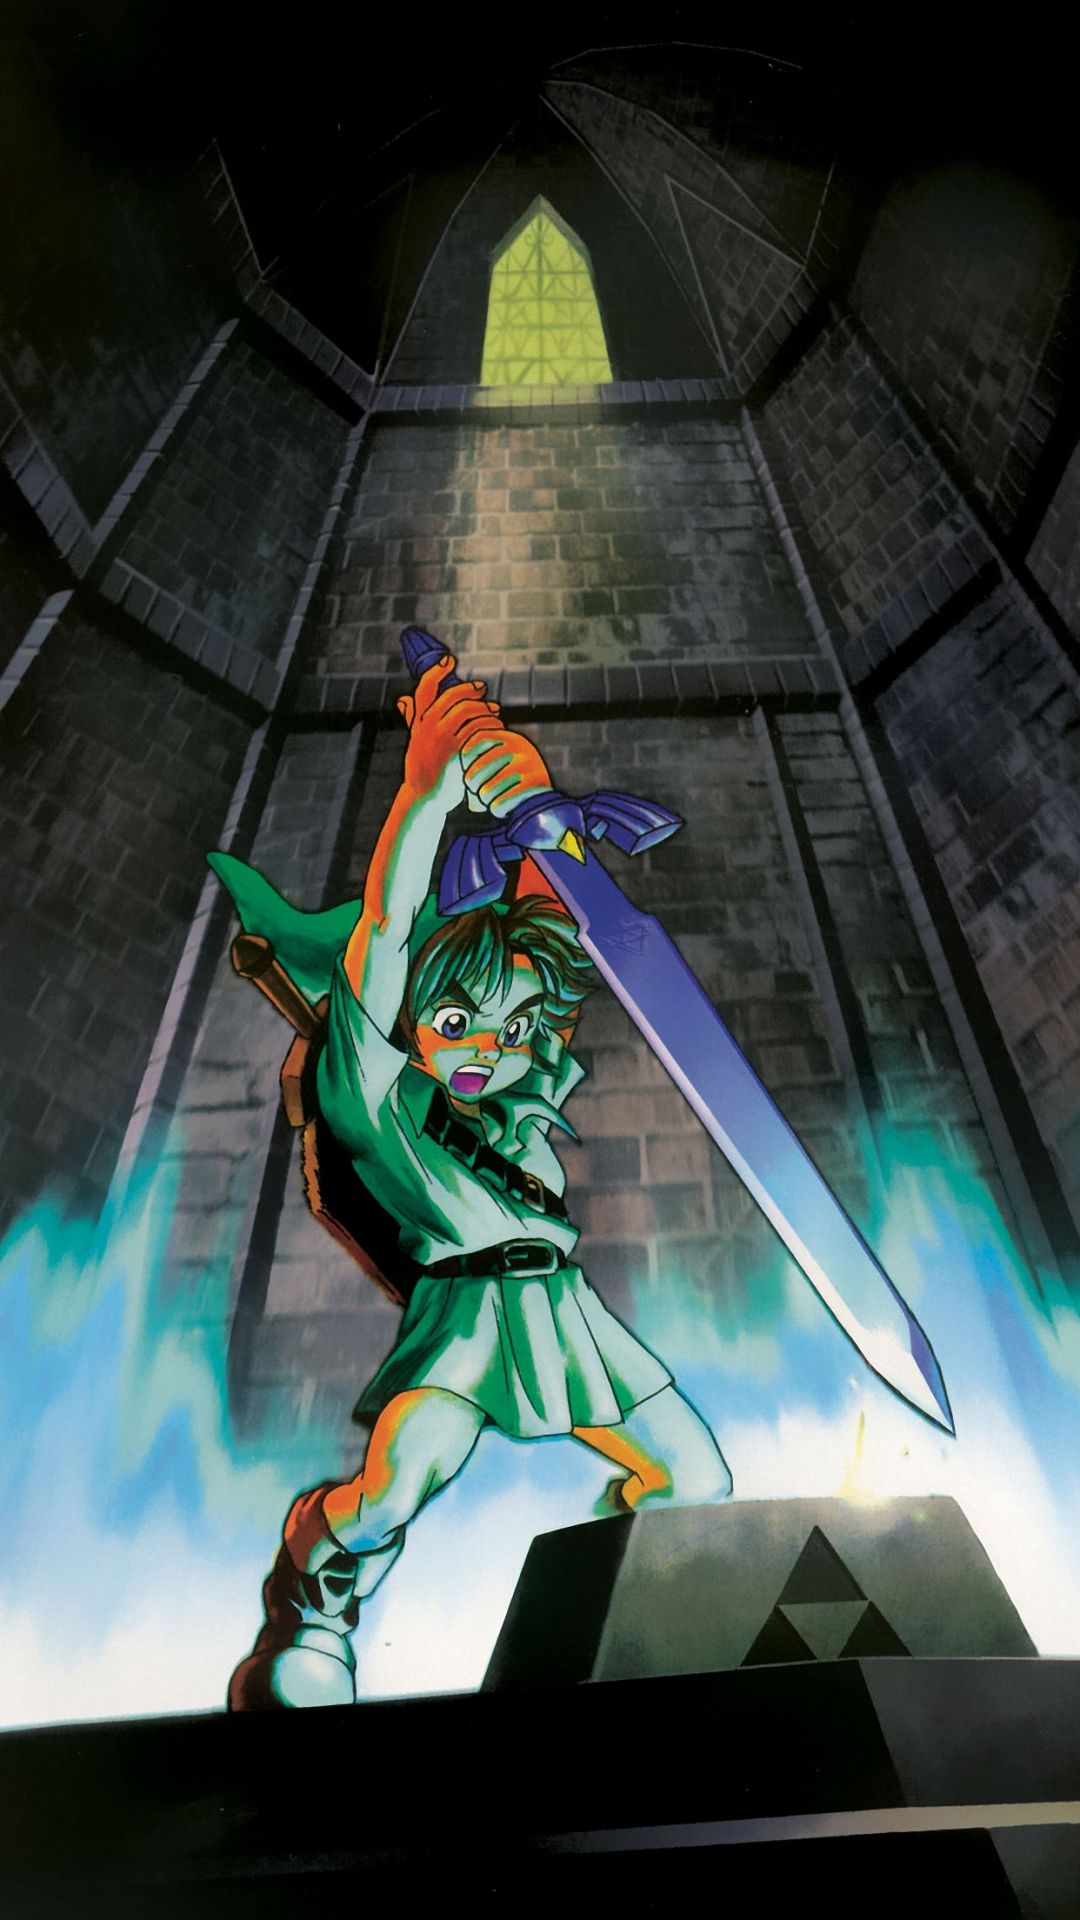 The Best Legend Of Zelda Wallpaper For iPhone S Ipod Touch